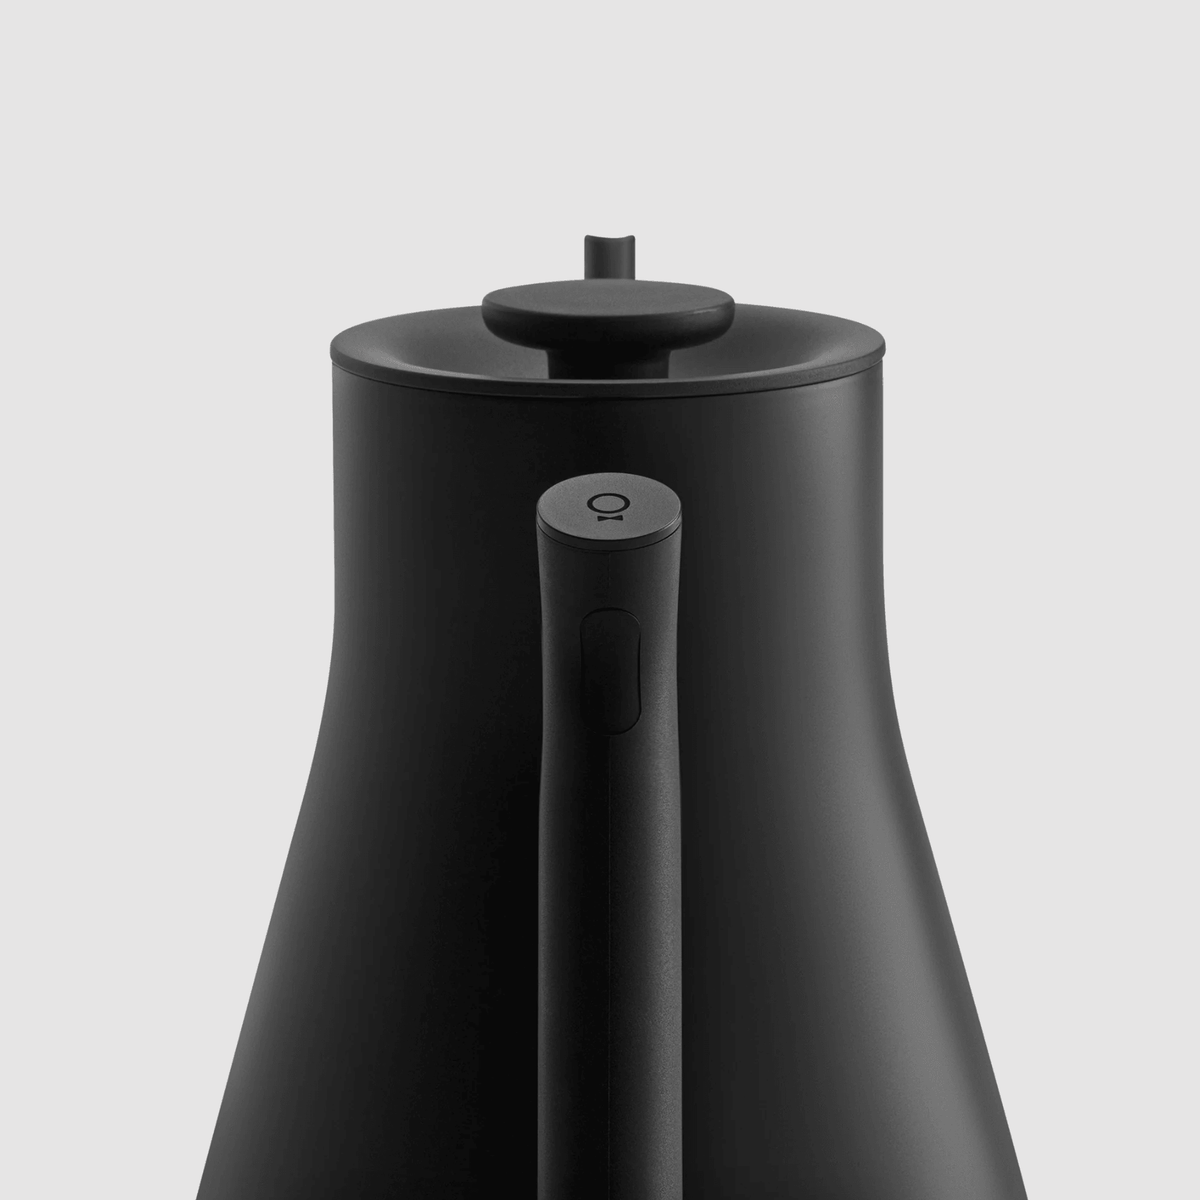 Stagg ECG Pro Electric Kettle Classic - Black